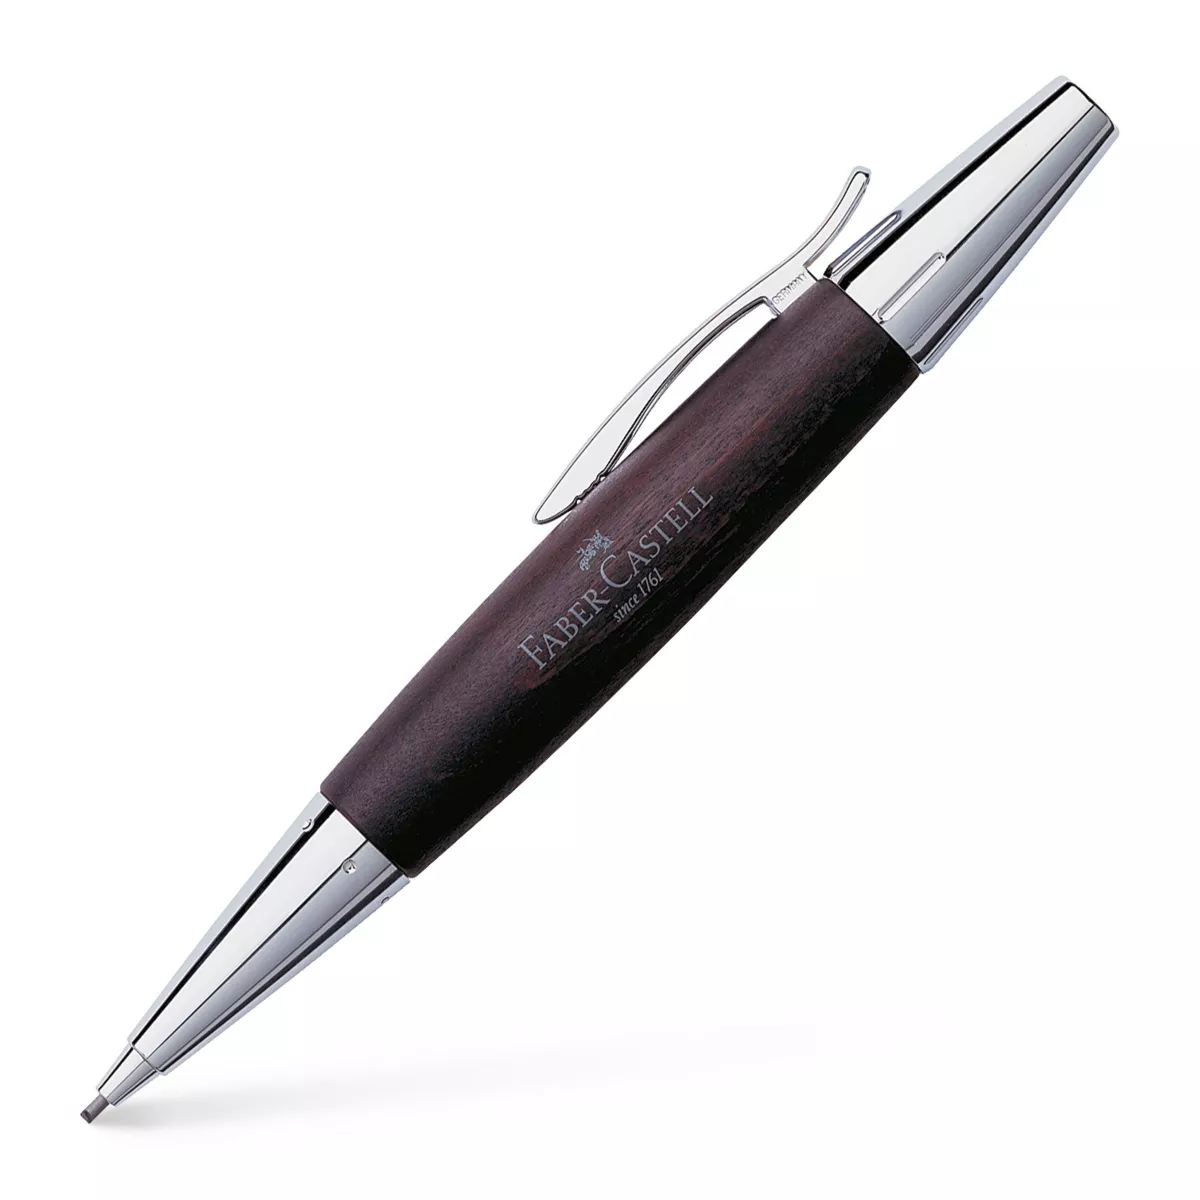 CREION MECANIC 1.4 MM E-MOTION PEARWOOD/MARO INCHIS FABER-CASTELL, [],crtbirotica.ro